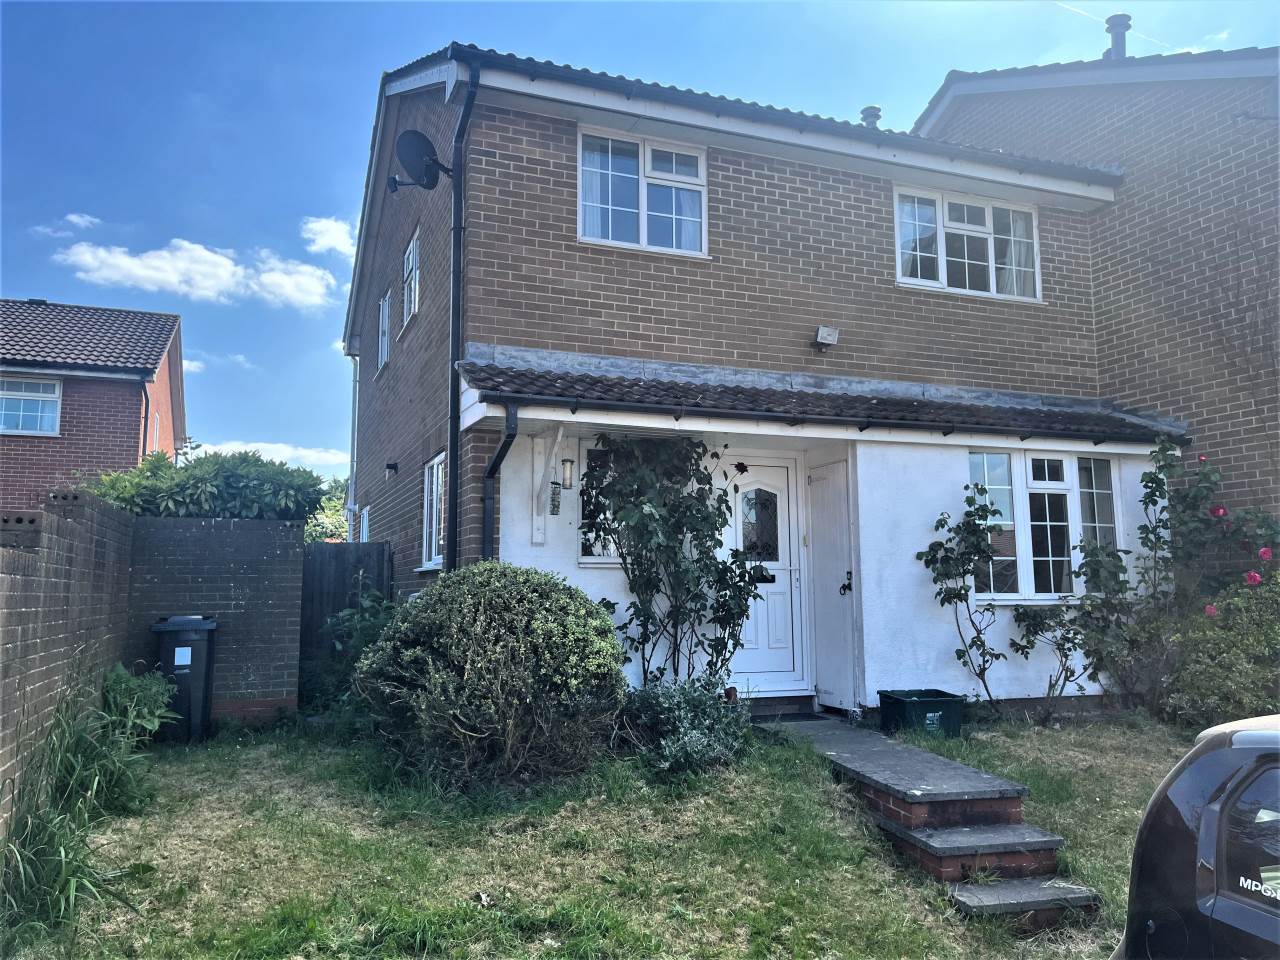 2 bed House (unspecified) for rent in Yate. From Property Wise